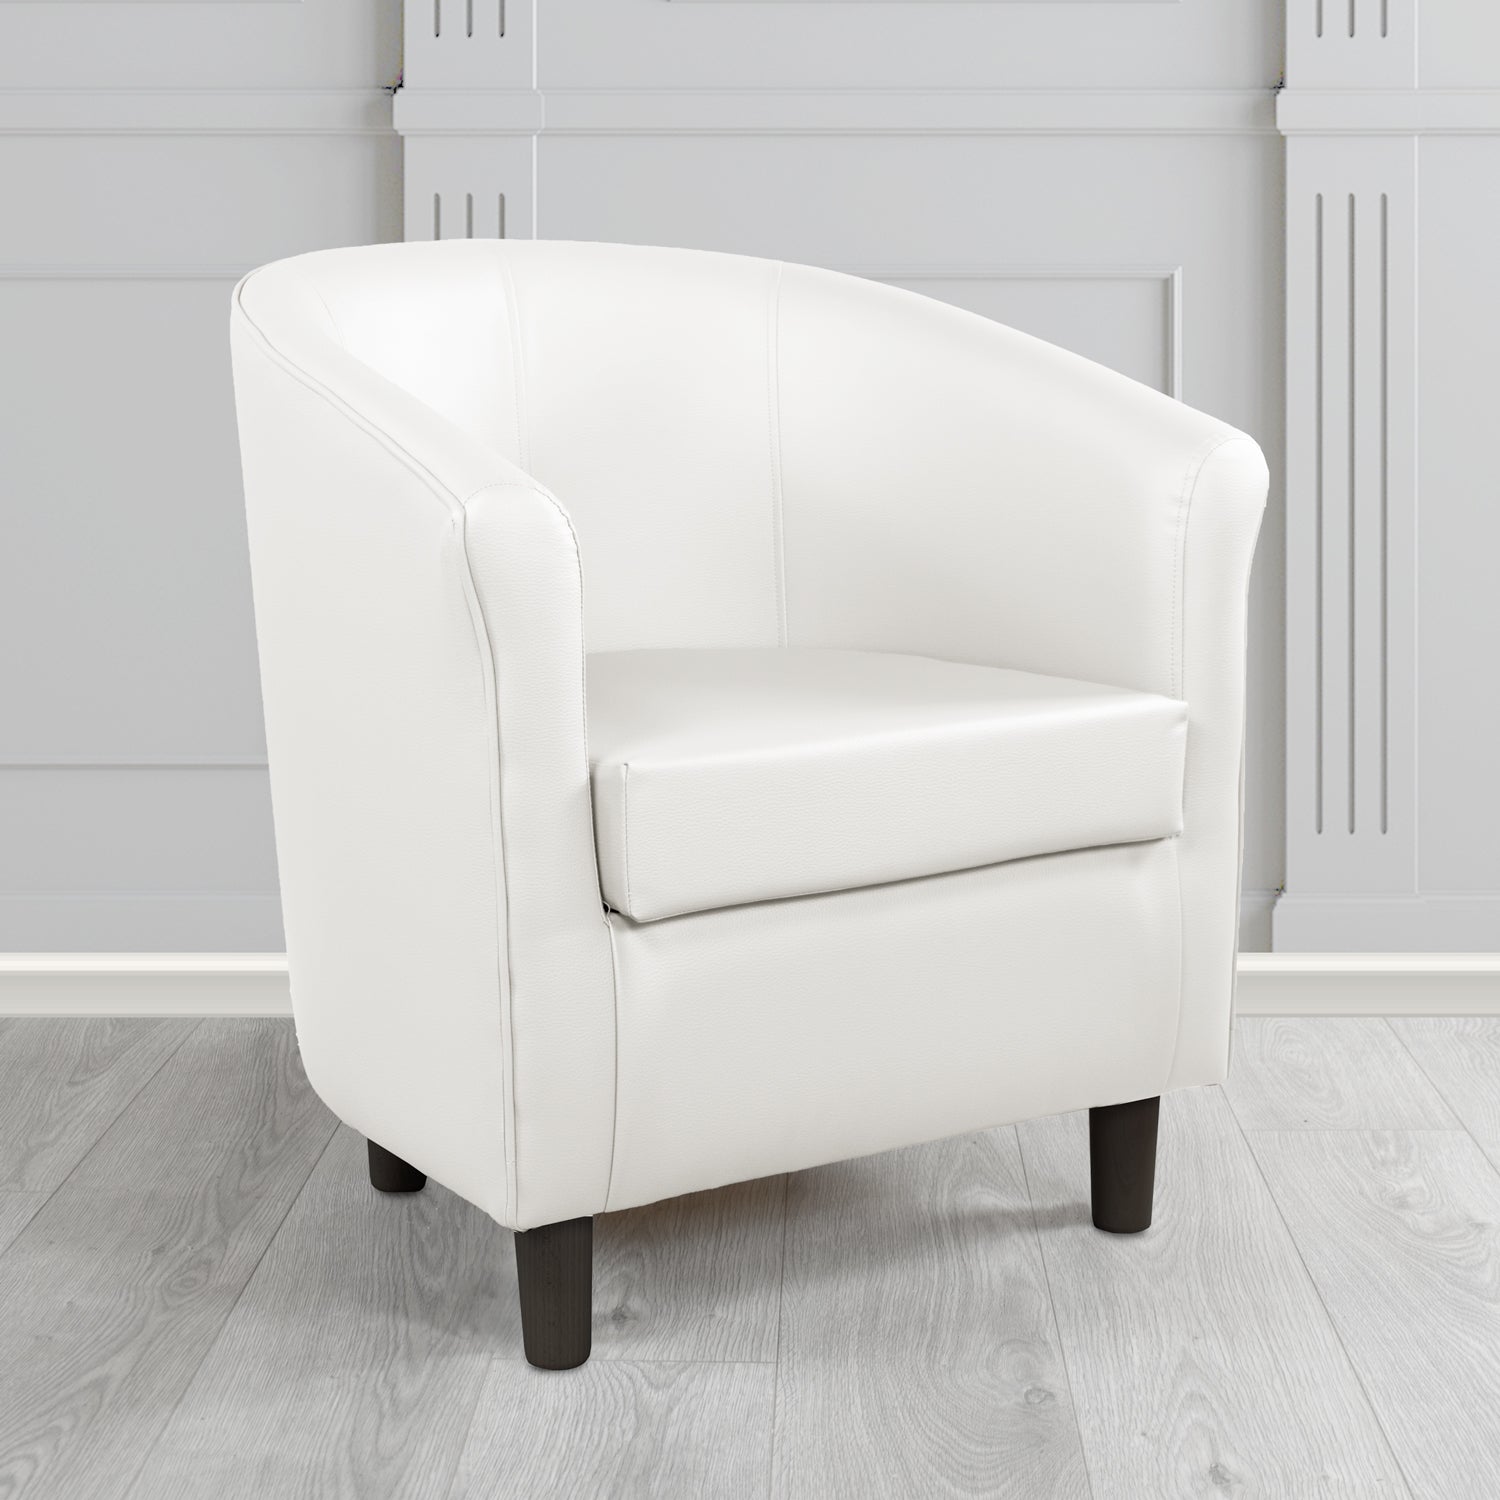 Tuscany Tub Chair in Madrid White Faux Leather - The Tub Chair Shop